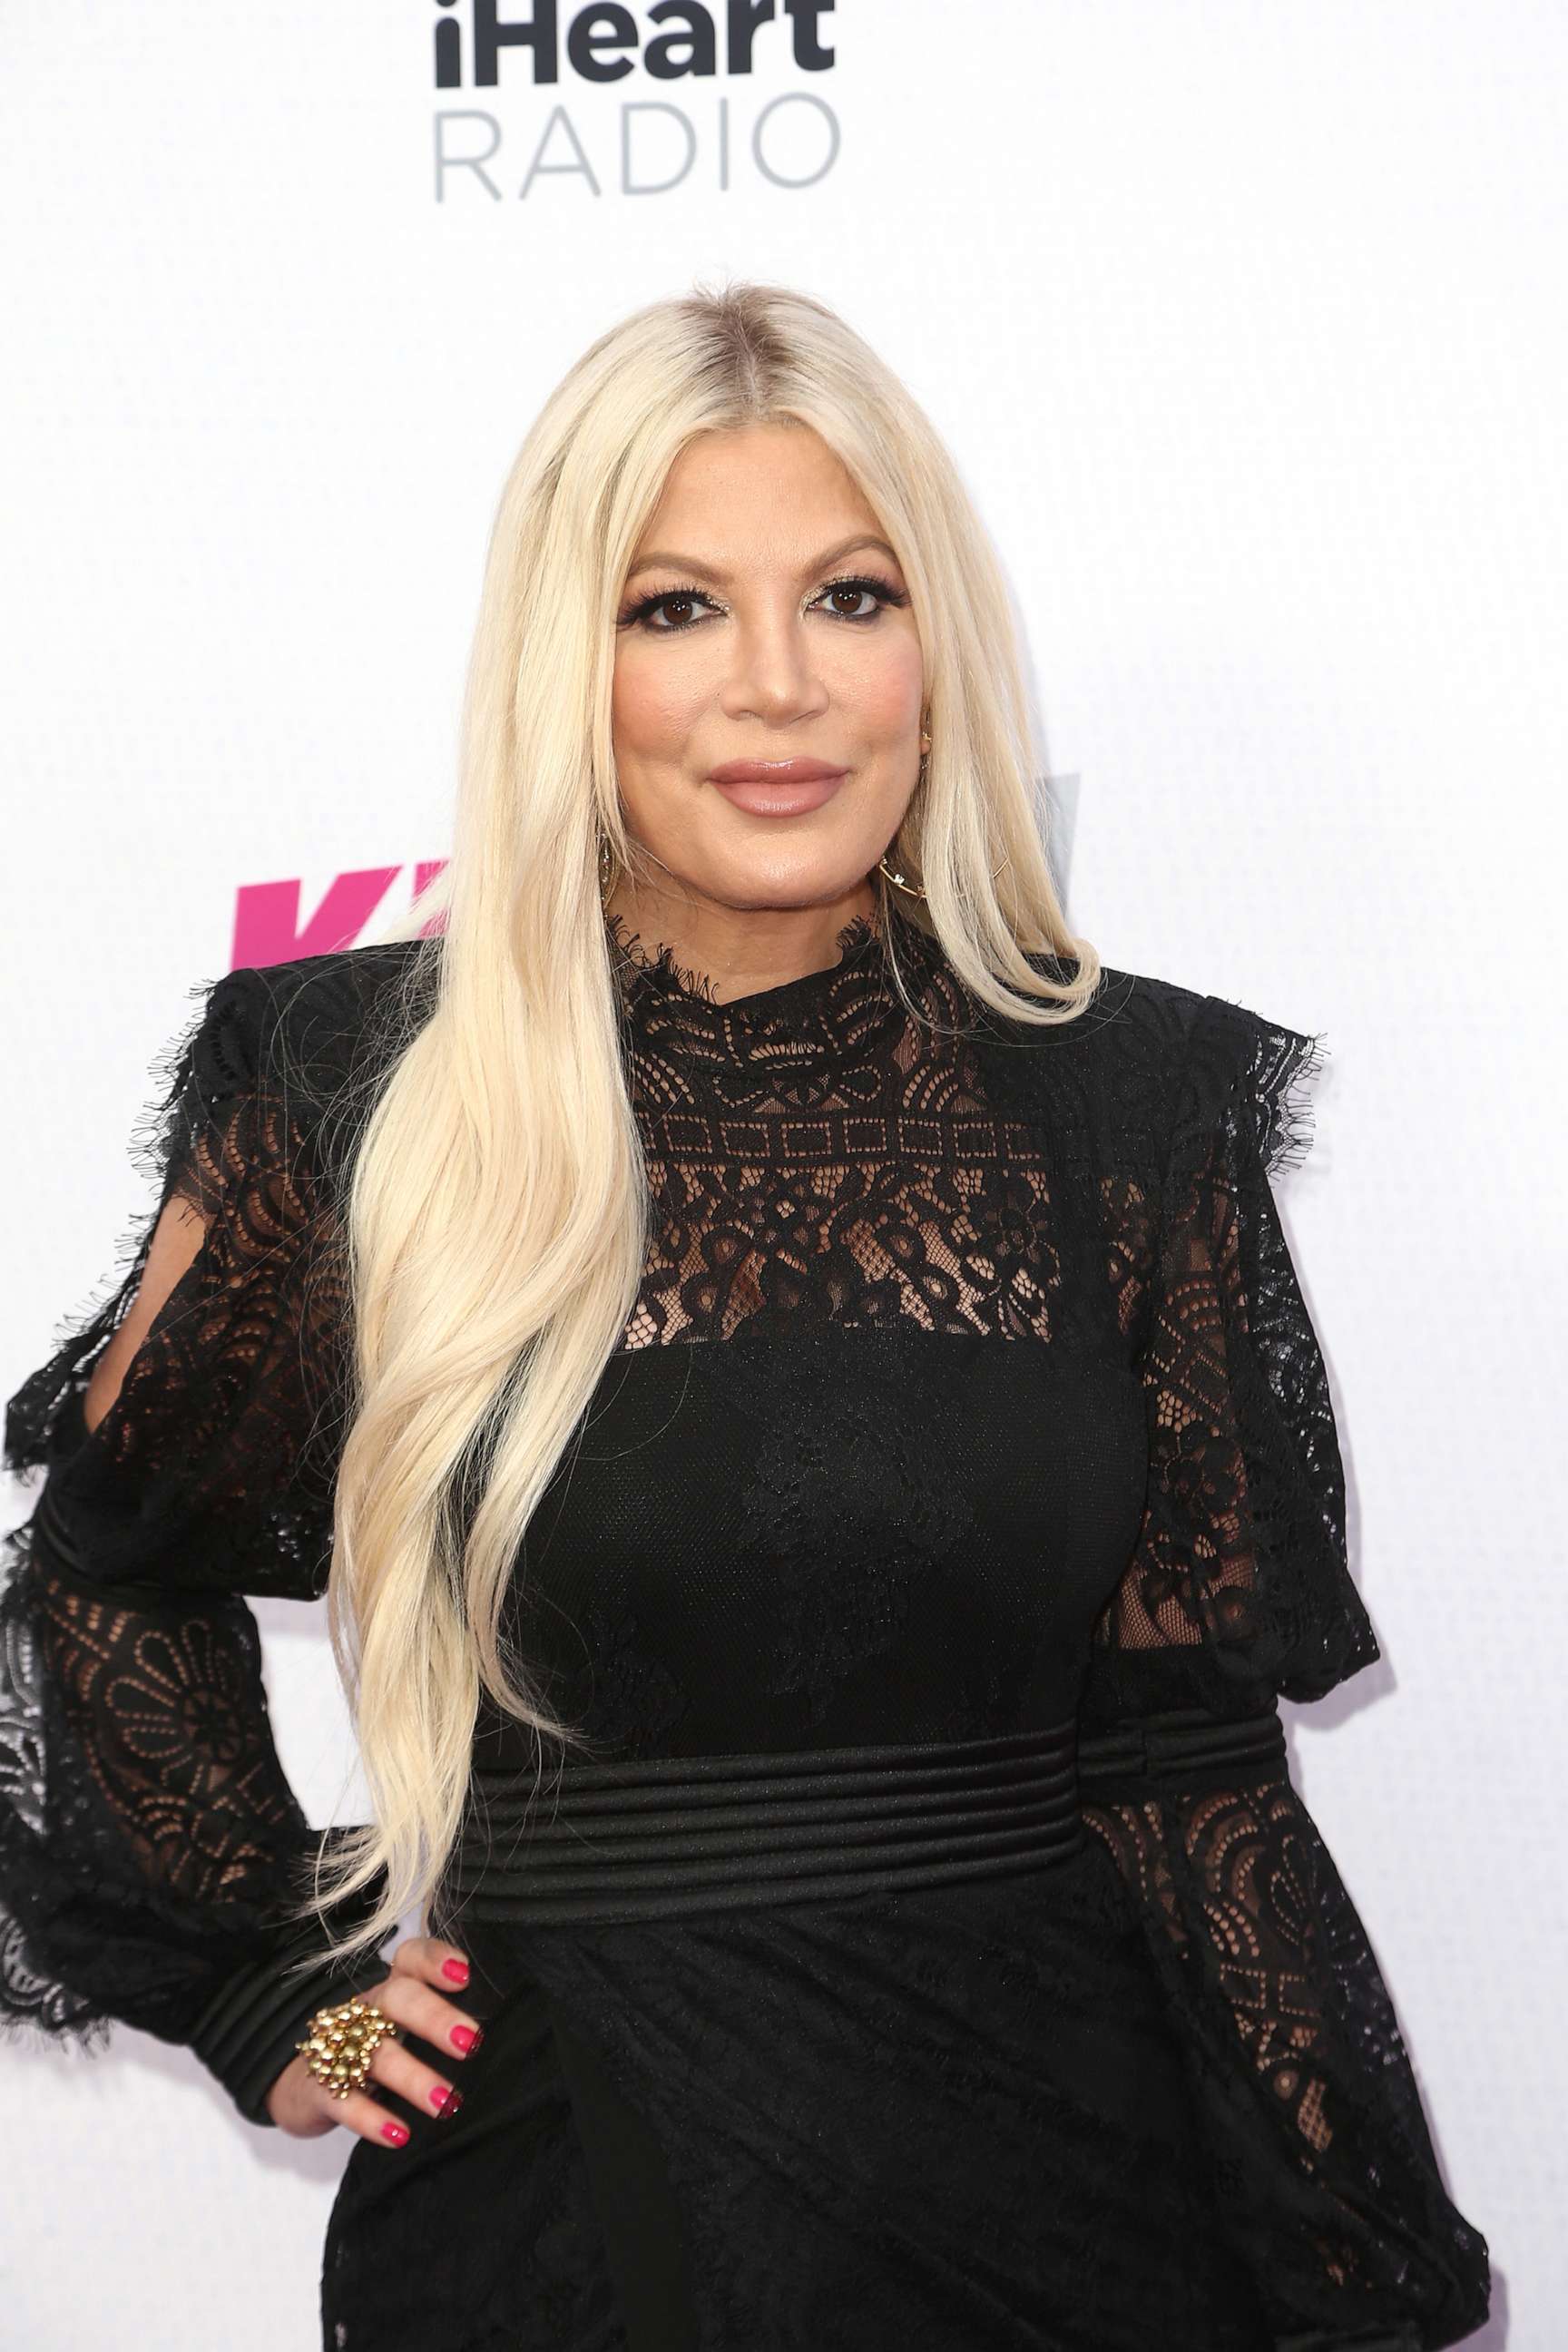 PHOTO: In this June 4, 2022, file photo, Tori Spelling attends an event in Carson, Calif.